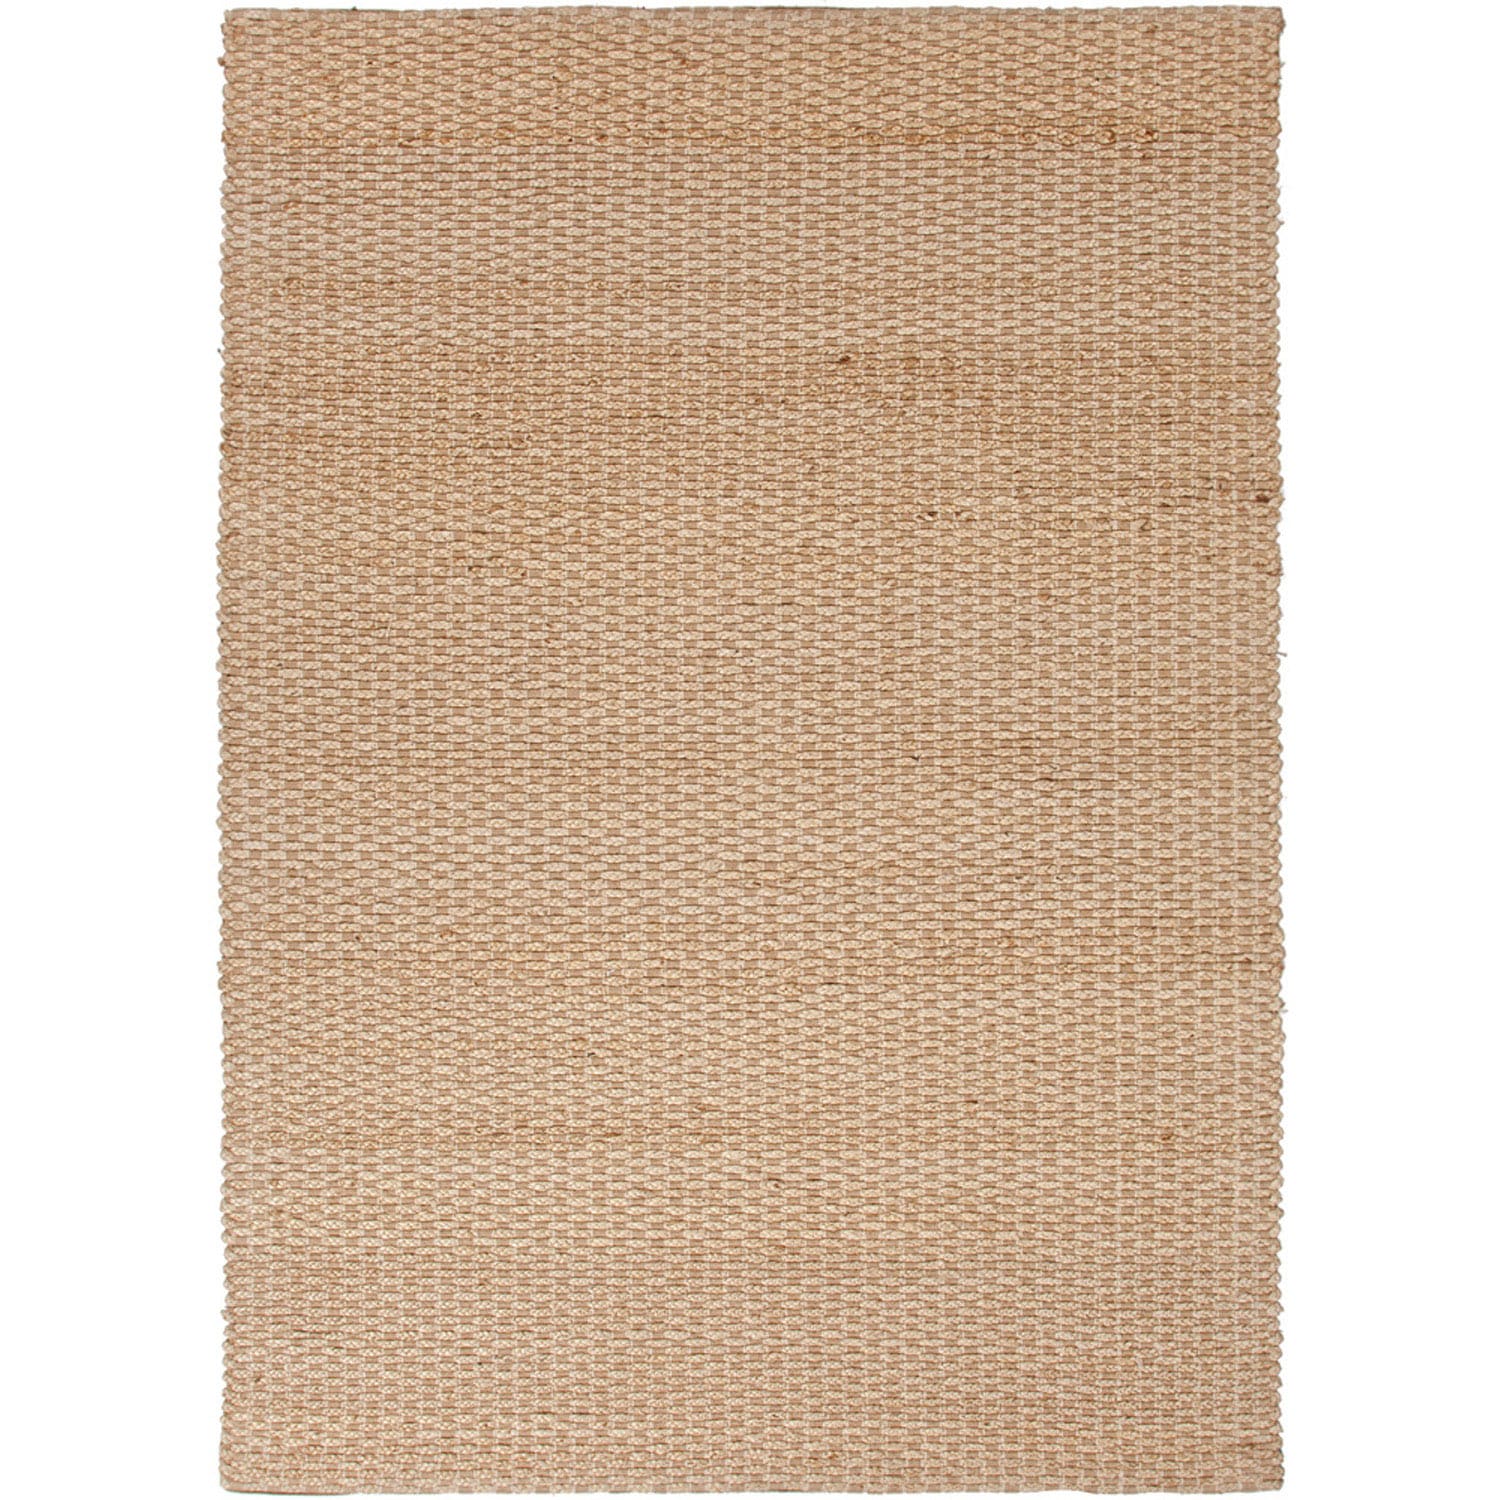 Handmade Naturals Solid pattern Brown Area Rug (5 X 8)